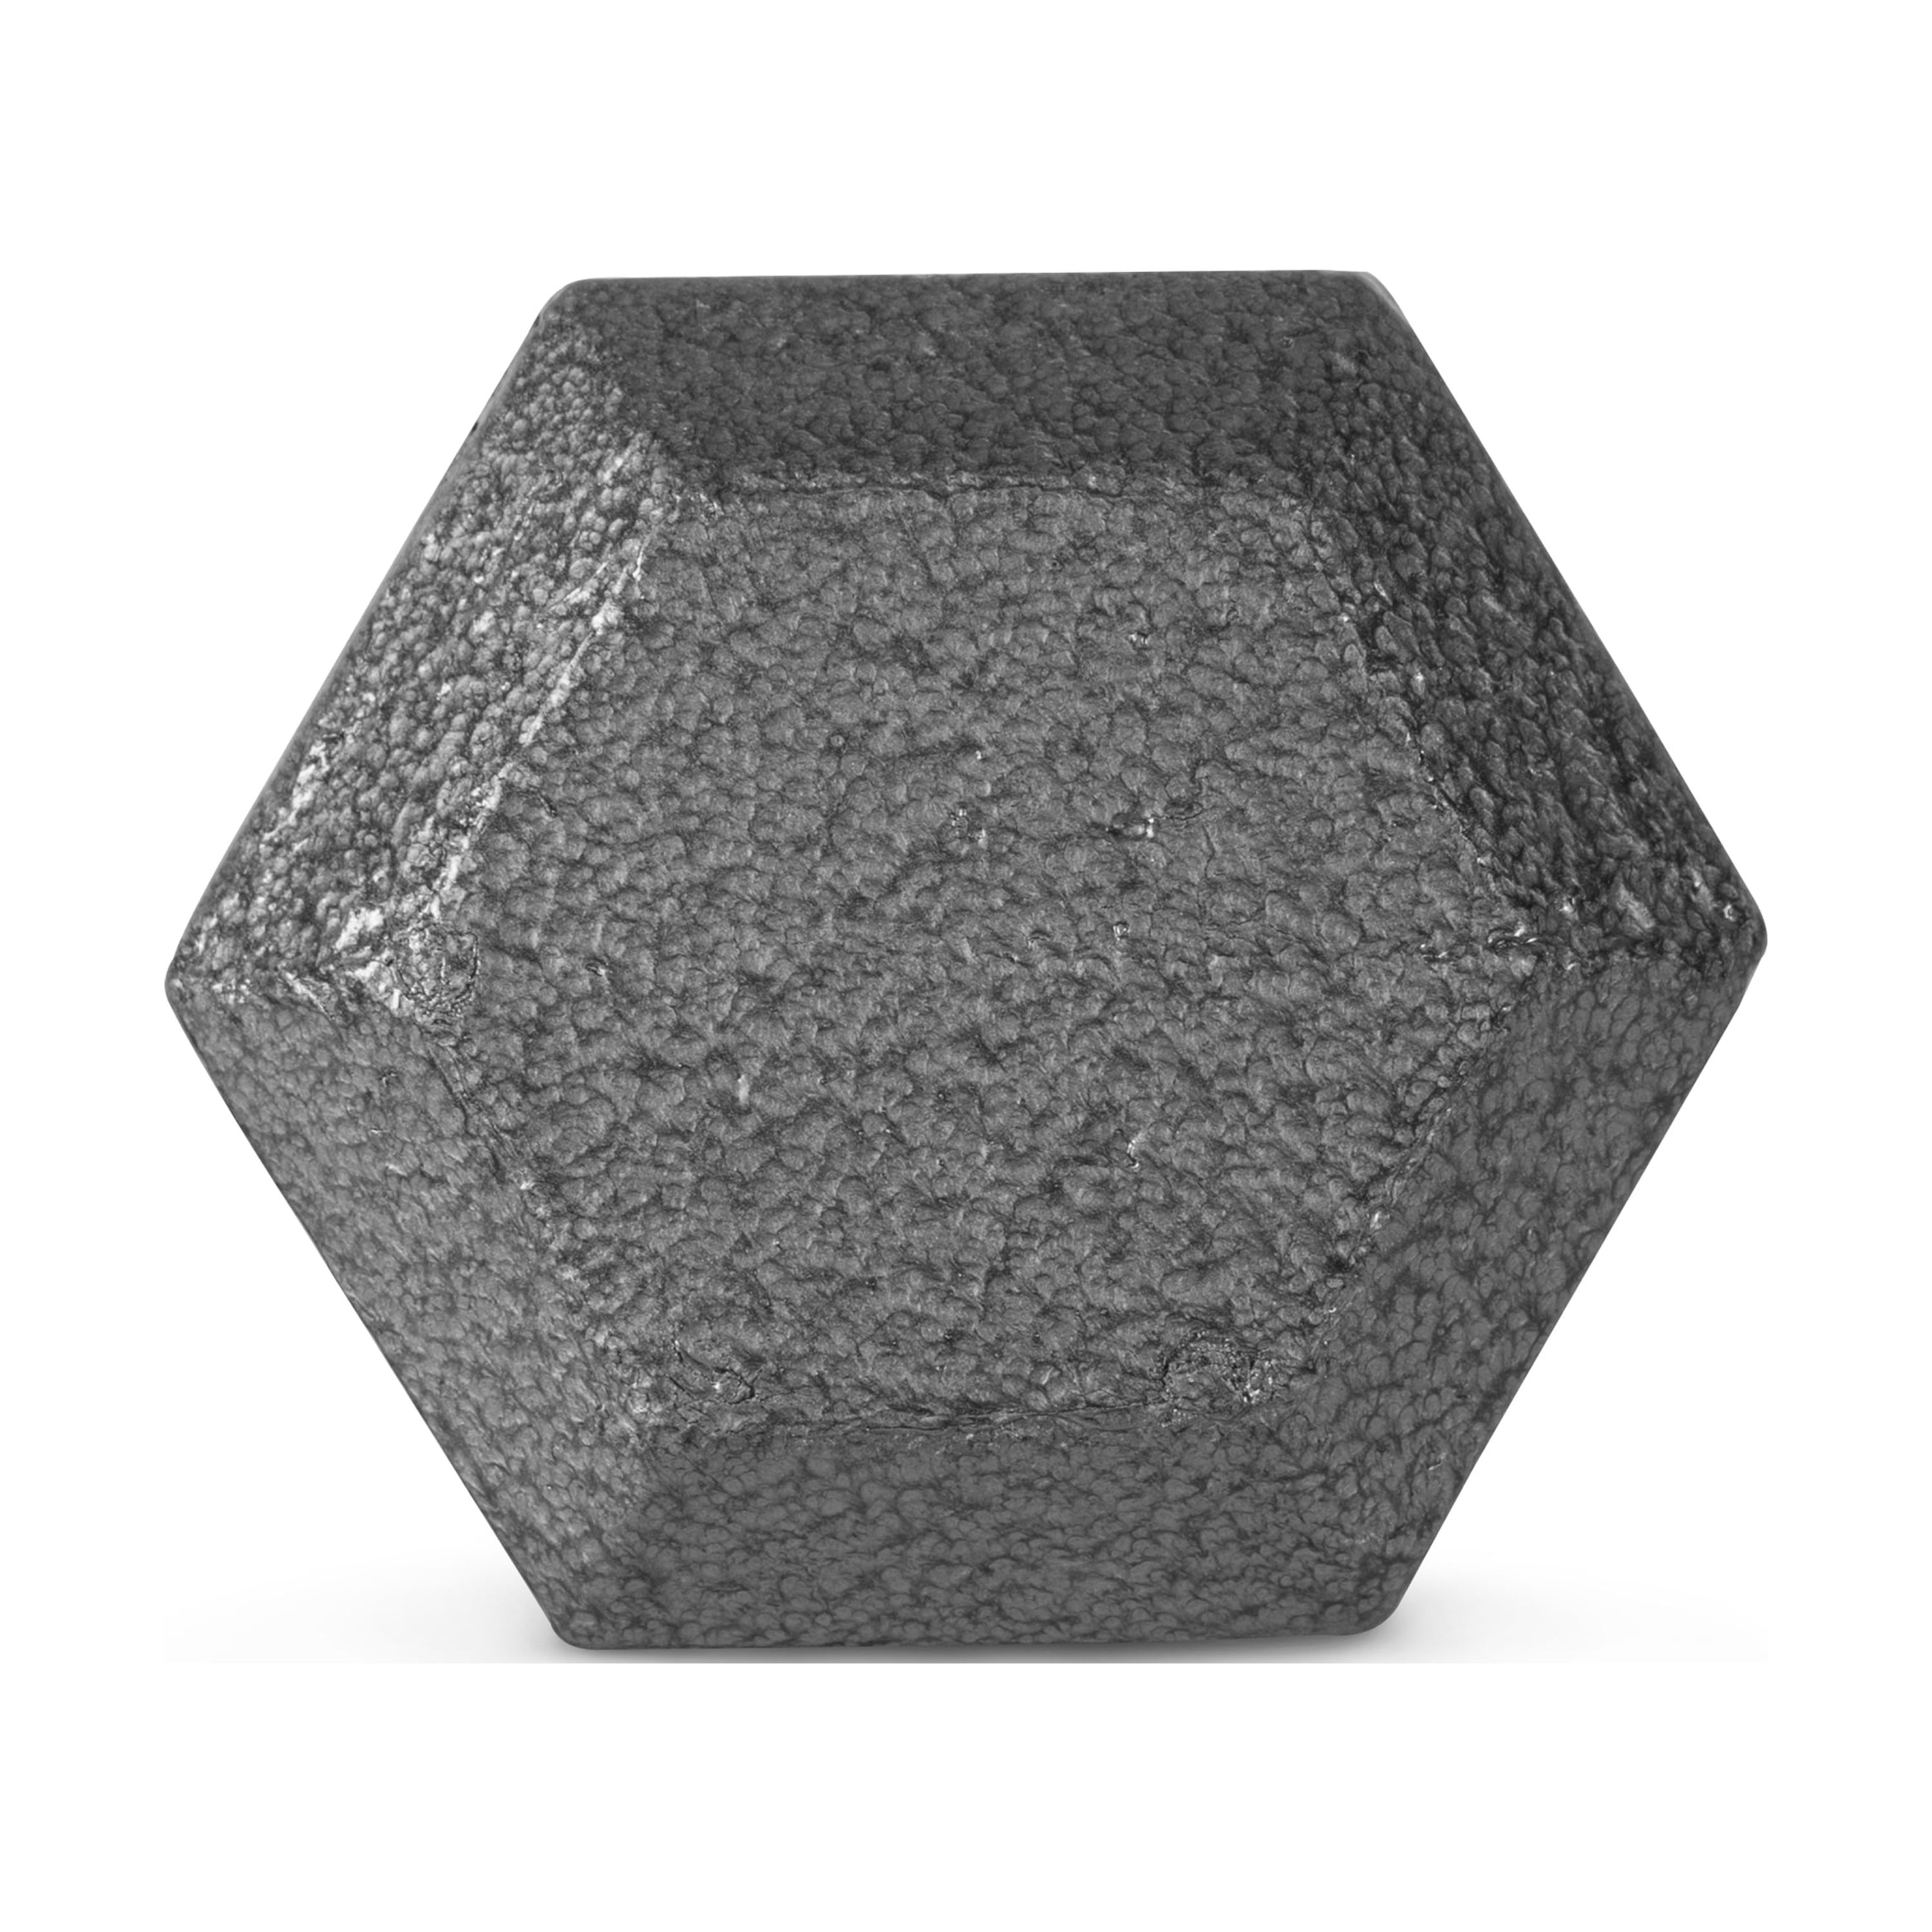 CAP Barbell 30lb Cast Iron Hex Dumbbell, Single - image 3 of 6